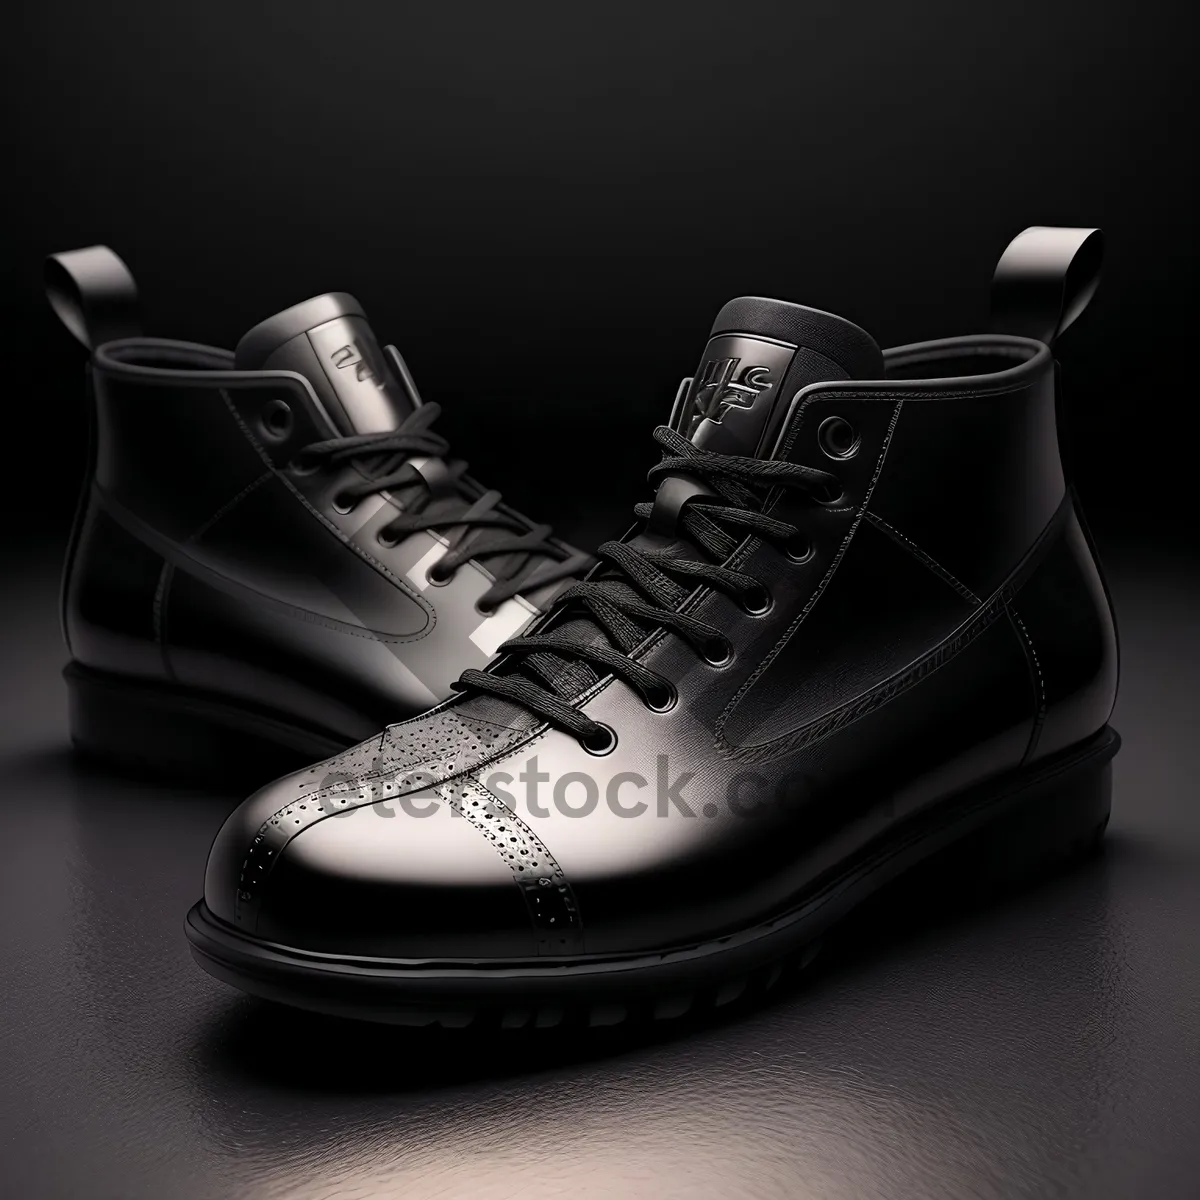 Picture of Classic Black Leather Lace-Up Boots for Men